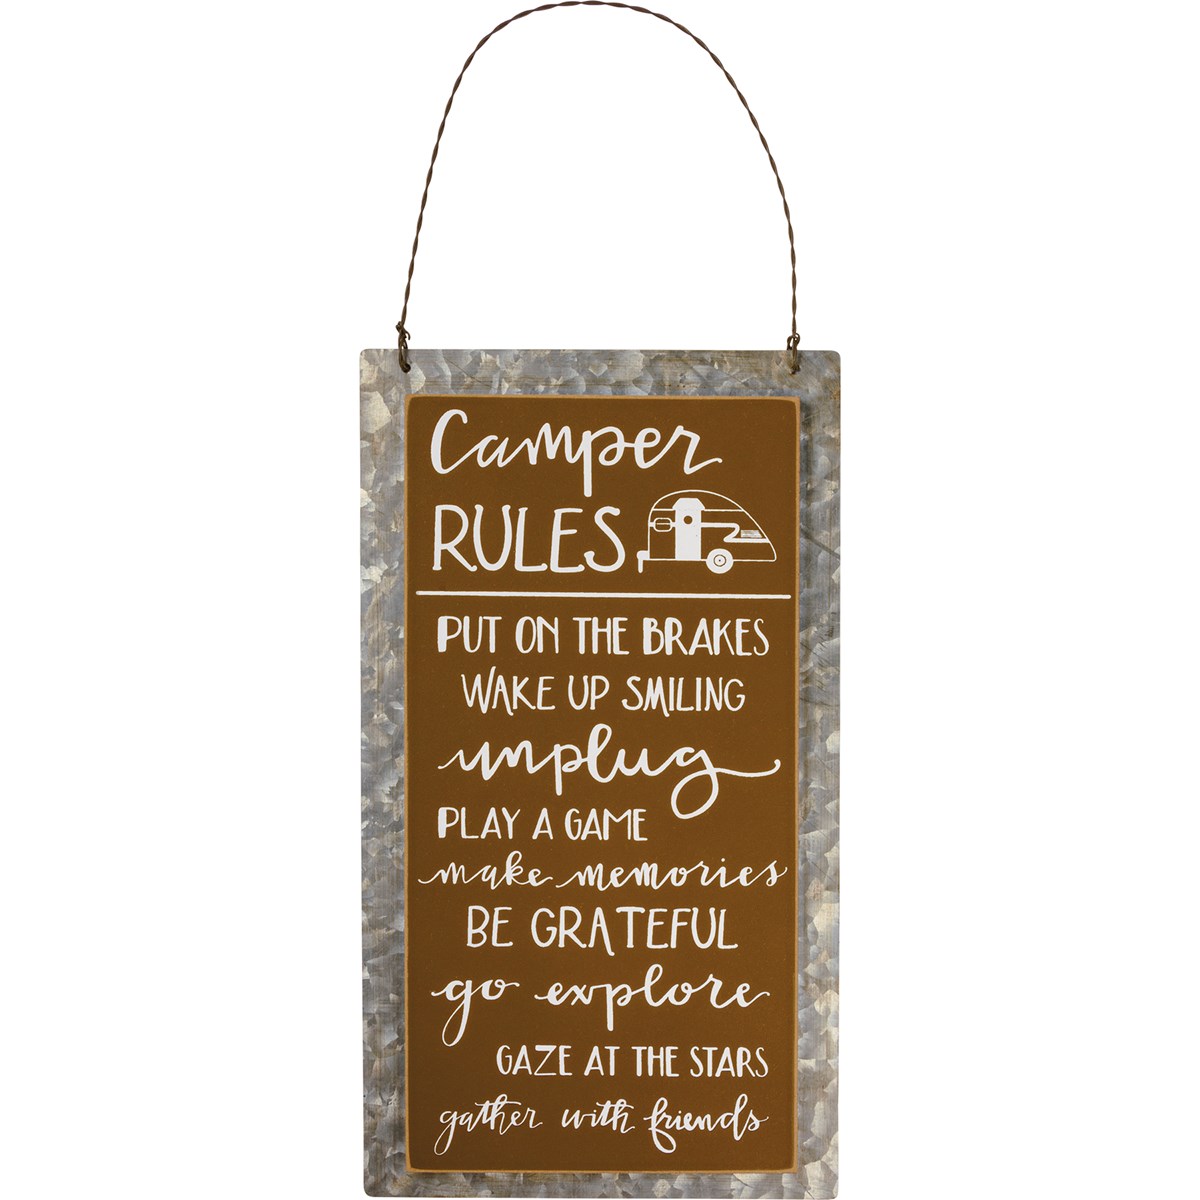 Camper Rules Hanging Decor - Wood, Metal, Wire